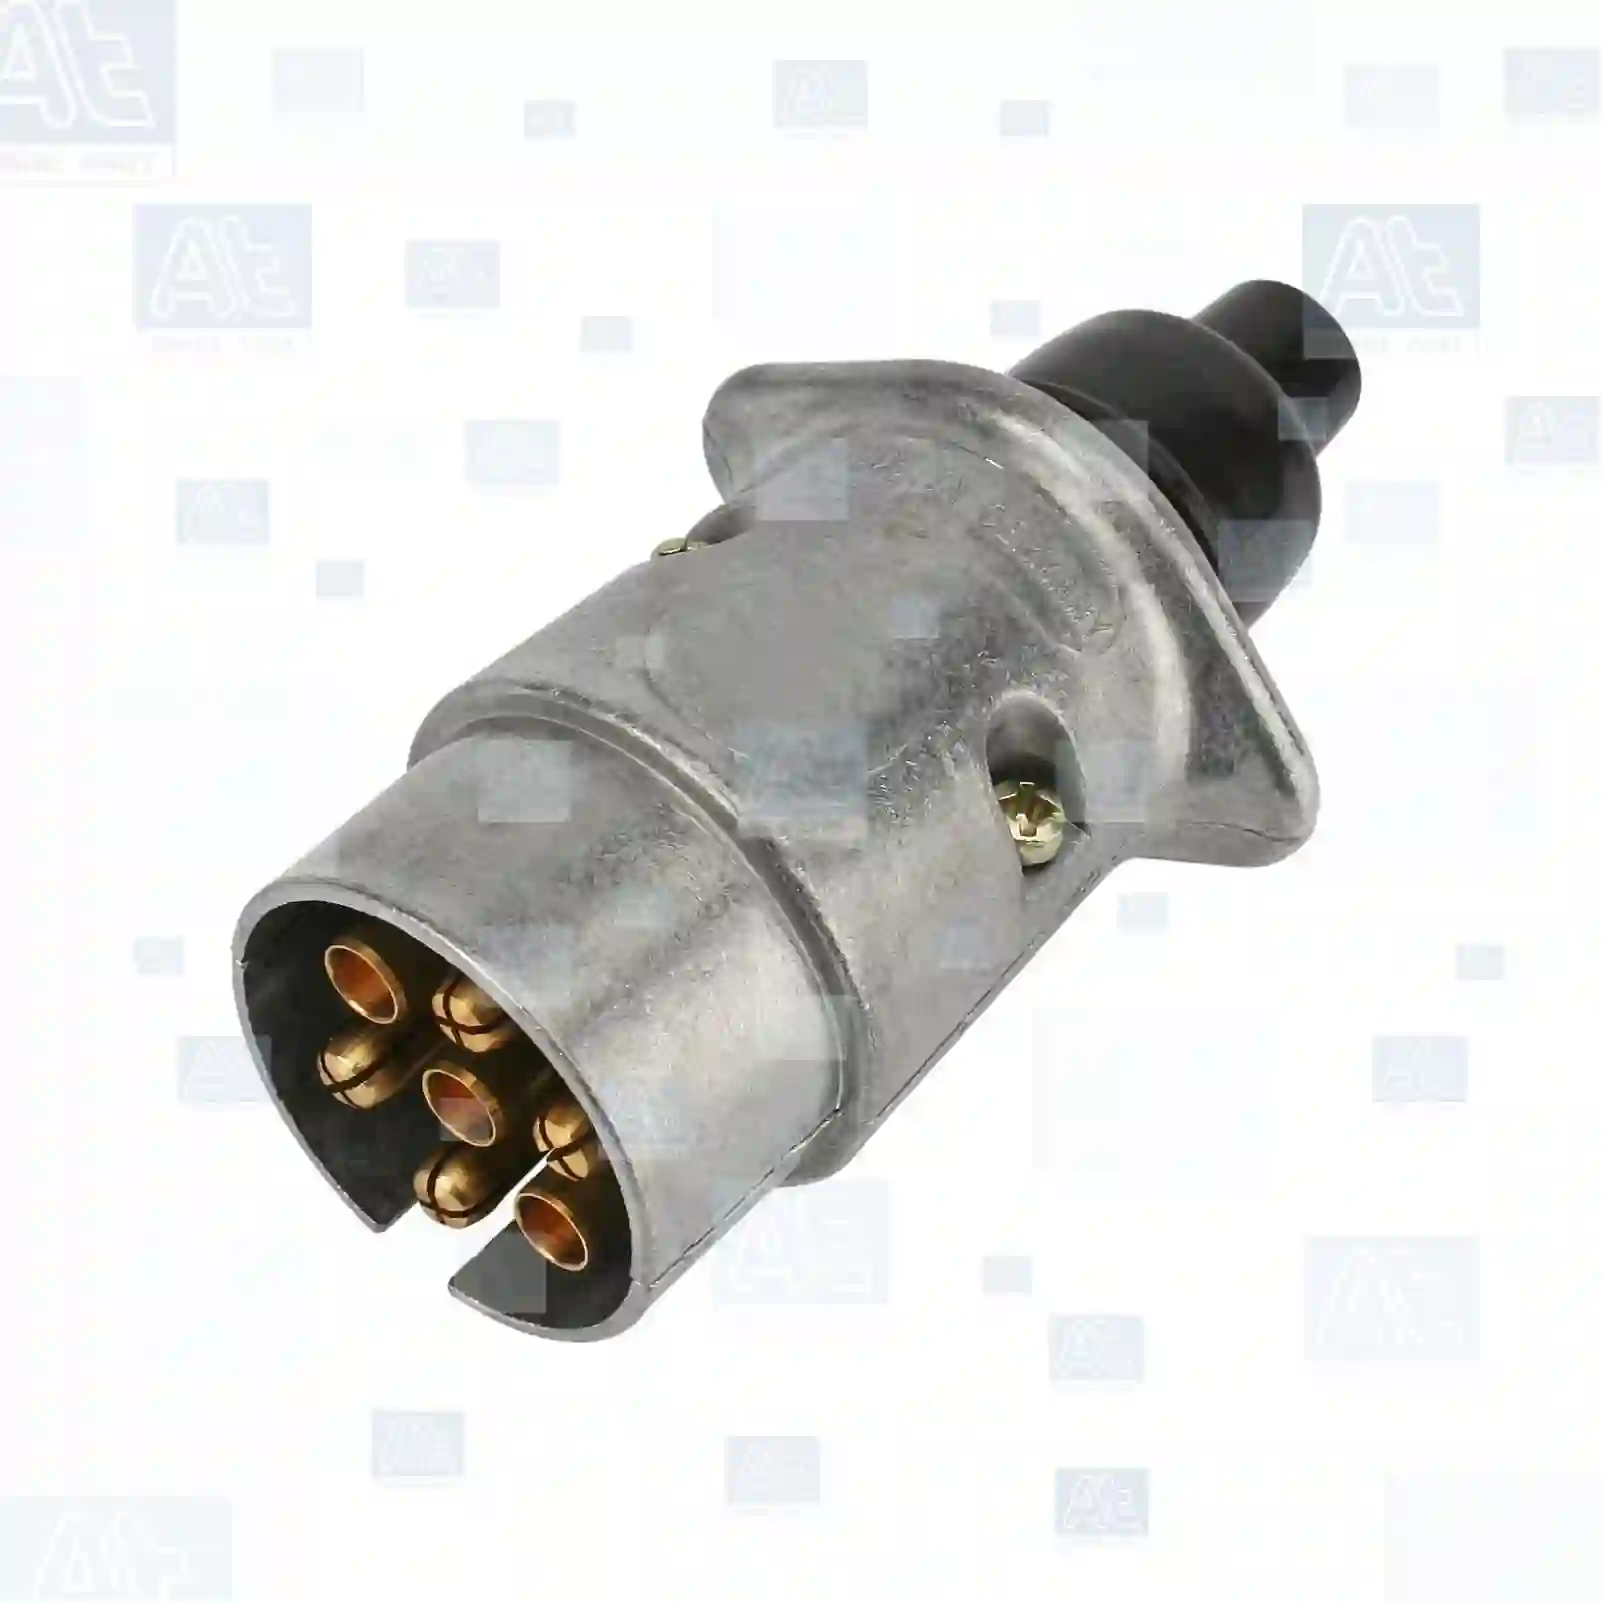 Plug, aluminium, at no 77710451, oem no: 0304410, 0867529, 304410, 867529, 05721340, 47050199, 00165090, 276290010, 8179040, X670305400000, 0870277, 9949510, AZ15002, 42954, 09245760, 500924576, 6050026, 605002708, 605002714, 605005001, 81254350175, 81254356010, 82254350053, 90816131215, N1011027206, 20223578, 207113, 207713, 060110, 1865100011, 415141, 0308443, 351294, 795720 At Spare Part | Engine, Accelerator Pedal, Camshaft, Connecting Rod, Crankcase, Crankshaft, Cylinder Head, Engine Suspension Mountings, Exhaust Manifold, Exhaust Gas Recirculation, Filter Kits, Flywheel Housing, General Overhaul Kits, Engine, Intake Manifold, Oil Cleaner, Oil Cooler, Oil Filter, Oil Pump, Oil Sump, Piston & Liner, Sensor & Switch, Timing Case, Turbocharger, Cooling System, Belt Tensioner, Coolant Filter, Coolant Pipe, Corrosion Prevention Agent, Drive, Expansion Tank, Fan, Intercooler, Monitors & Gauges, Radiator, Thermostat, V-Belt / Timing belt, Water Pump, Fuel System, Electronical Injector Unit, Feed Pump, Fuel Filter, cpl., Fuel Gauge Sender,  Fuel Line, Fuel Pump, Fuel Tank, Injection Line Kit, Injection Pump, Exhaust System, Clutch & Pedal, Gearbox, Propeller Shaft, Axles, Brake System, Hubs & Wheels, Suspension, Leaf Spring, Universal Parts / Accessories, Steering, Electrical System, Cabin Plug, aluminium, at no 77710451, oem no: 0304410, 0867529, 304410, 867529, 05721340, 47050199, 00165090, 276290010, 8179040, X670305400000, 0870277, 9949510, AZ15002, 42954, 09245760, 500924576, 6050026, 605002708, 605002714, 605005001, 81254350175, 81254356010, 82254350053, 90816131215, N1011027206, 20223578, 207113, 207713, 060110, 1865100011, 415141, 0308443, 351294, 795720 At Spare Part | Engine, Accelerator Pedal, Camshaft, Connecting Rod, Crankcase, Crankshaft, Cylinder Head, Engine Suspension Mountings, Exhaust Manifold, Exhaust Gas Recirculation, Filter Kits, Flywheel Housing, General Overhaul Kits, Engine, Intake Manifold, Oil Cleaner, Oil Cooler, Oil Filter, Oil Pump, Oil Sump, Piston & Liner, Sensor & Switch, Timing Case, Turbocharger, Cooling System, Belt Tensioner, Coolant Filter, Coolant Pipe, Corrosion Prevention Agent, Drive, Expansion Tank, Fan, Intercooler, Monitors & Gauges, Radiator, Thermostat, V-Belt / Timing belt, Water Pump, Fuel System, Electronical Injector Unit, Feed Pump, Fuel Filter, cpl., Fuel Gauge Sender,  Fuel Line, Fuel Pump, Fuel Tank, Injection Line Kit, Injection Pump, Exhaust System, Clutch & Pedal, Gearbox, Propeller Shaft, Axles, Brake System, Hubs & Wheels, Suspension, Leaf Spring, Universal Parts / Accessories, Steering, Electrical System, Cabin